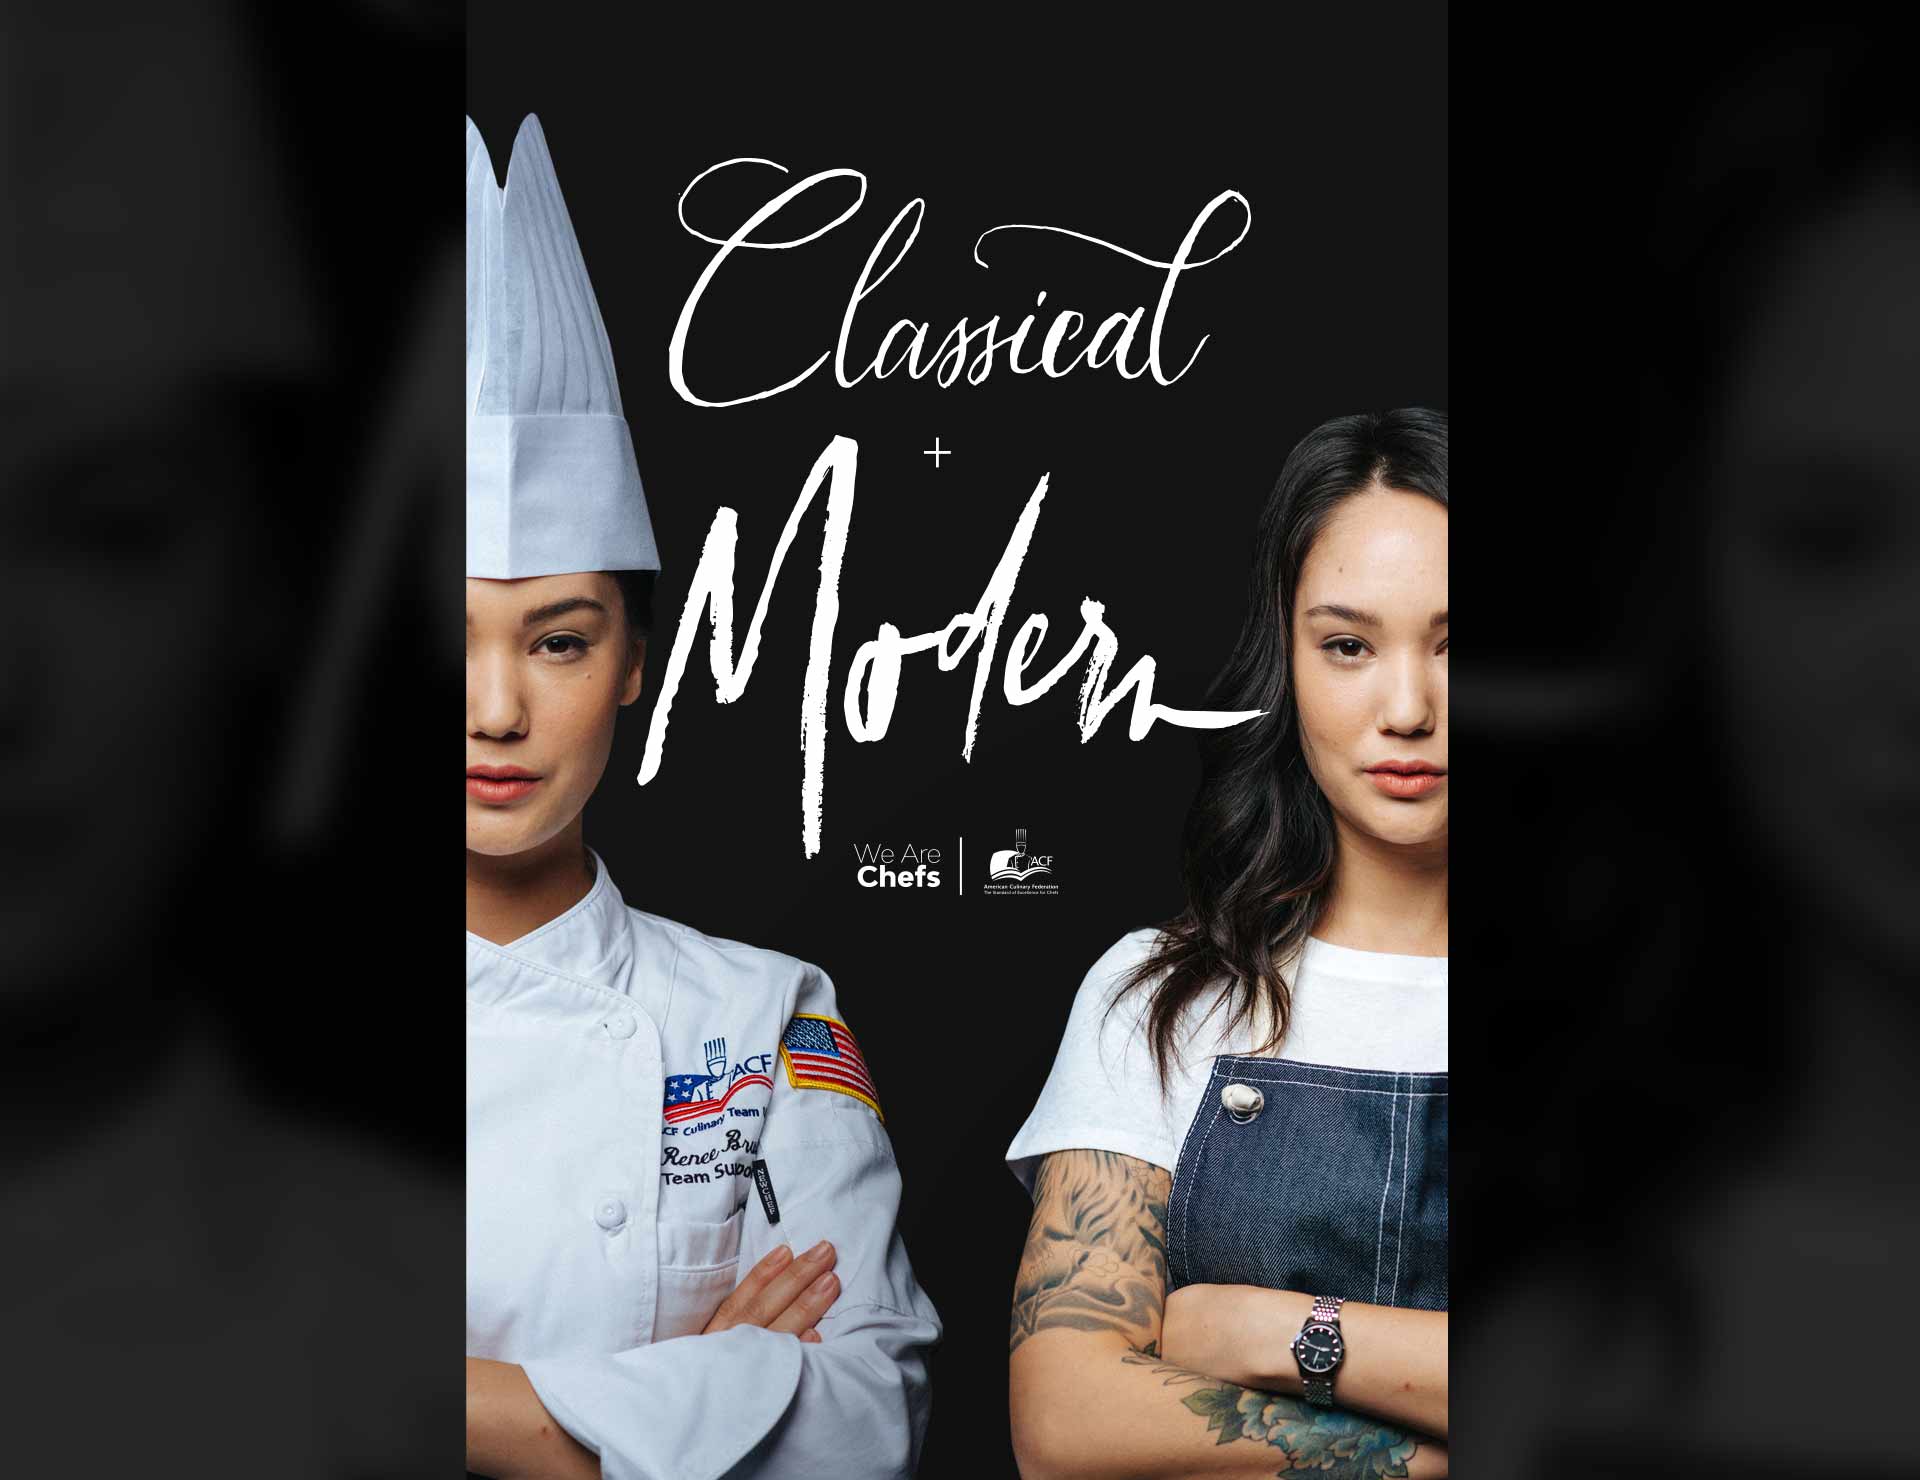 We Are Chefs Campaign classical & modern